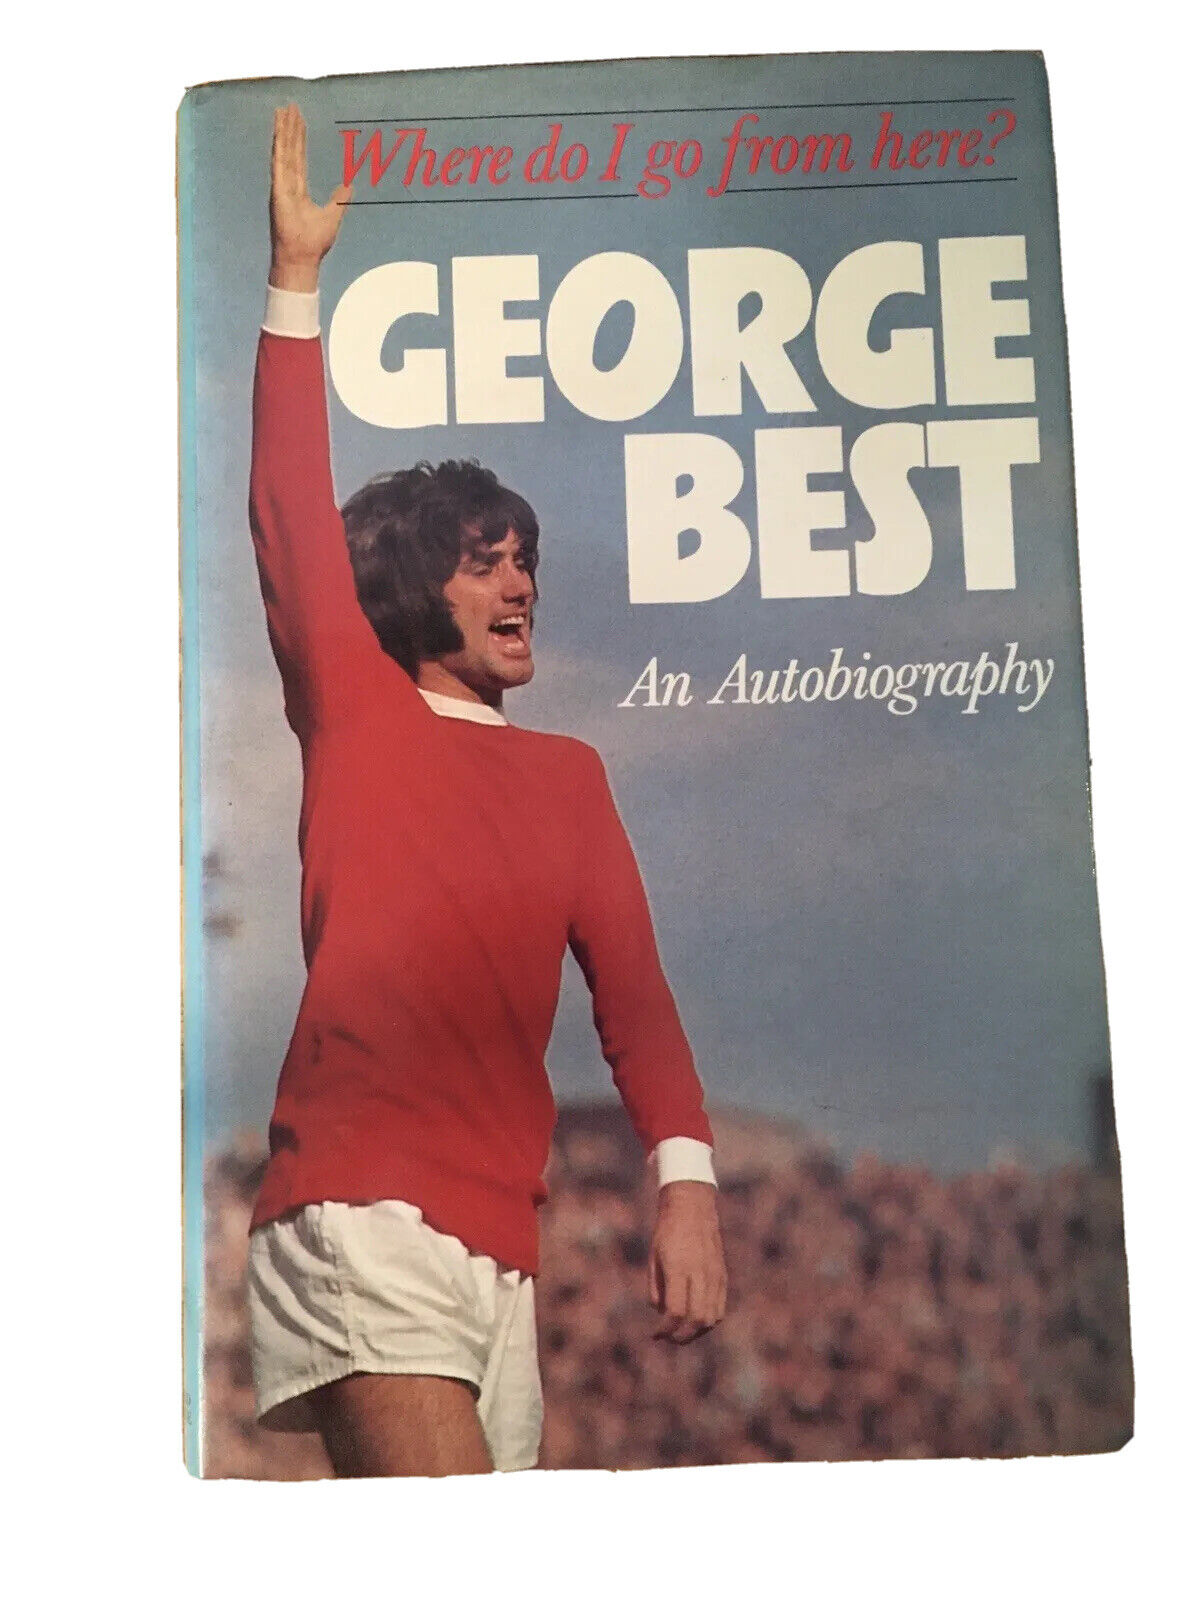 George Best  Signed Book. Early autobiography  Football legend